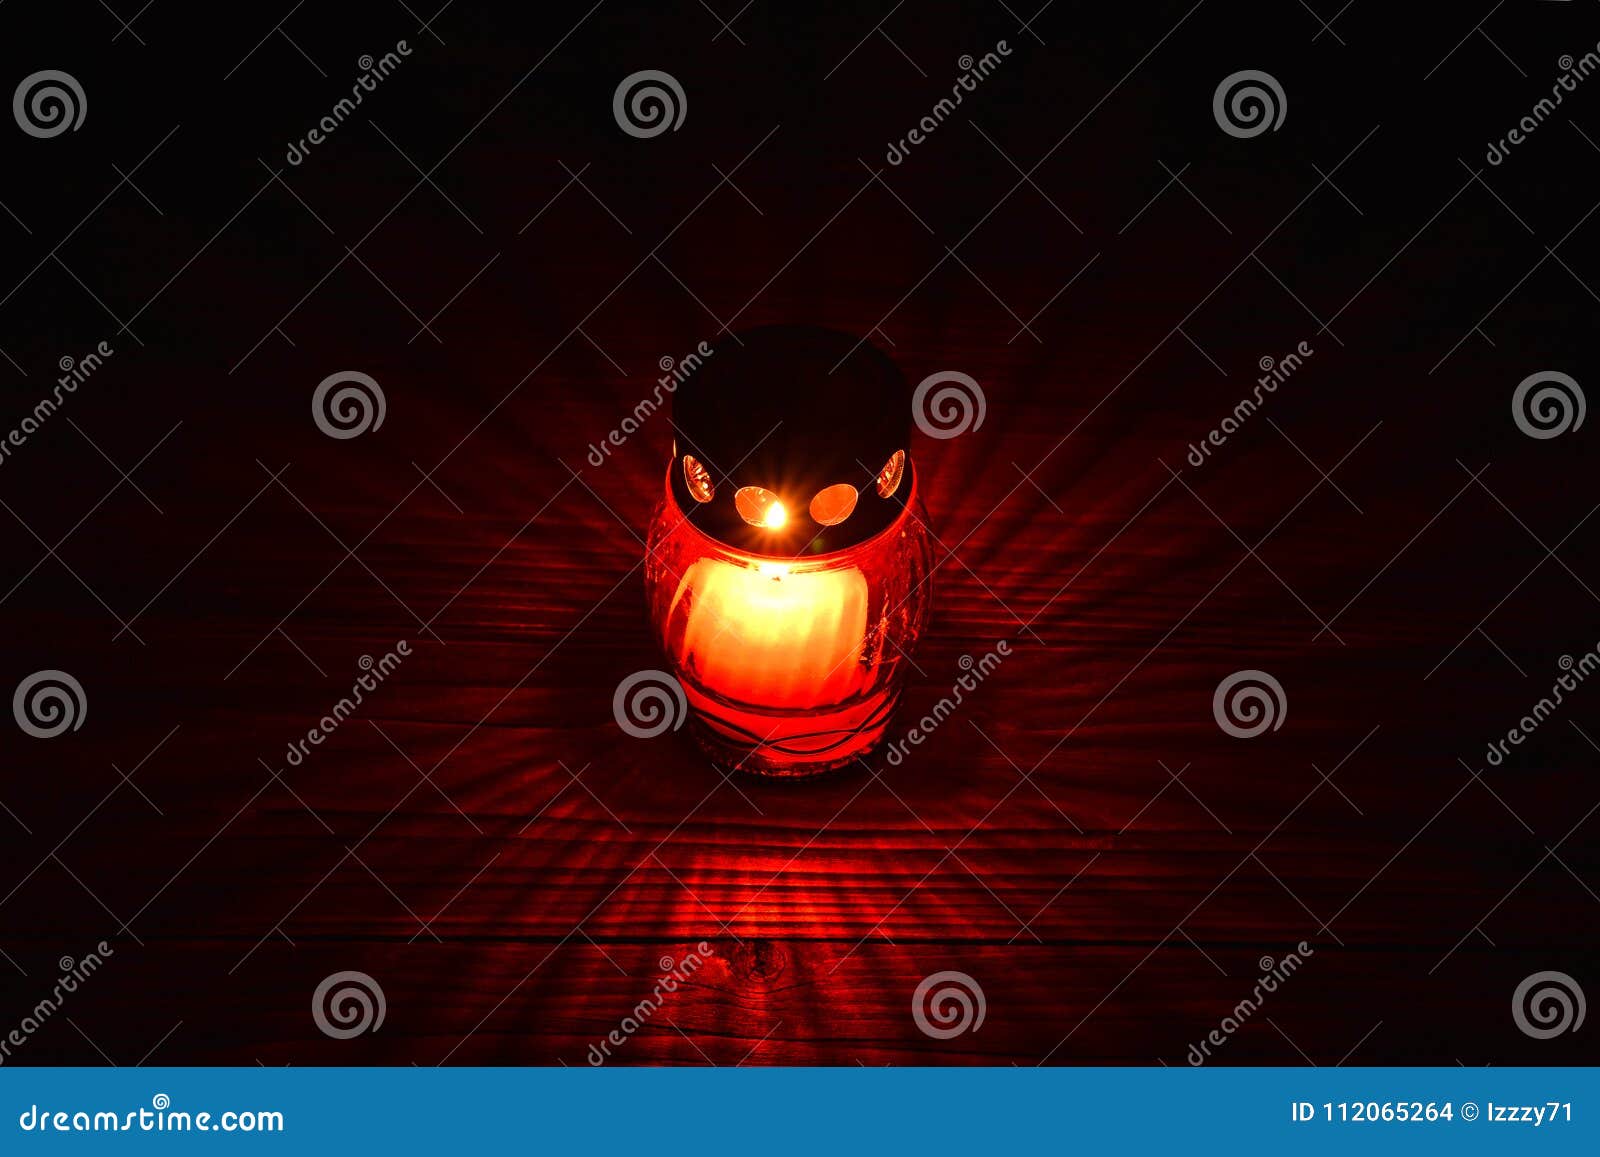 All Saints Day candle stock photo. Image of night, funeral - 112065264